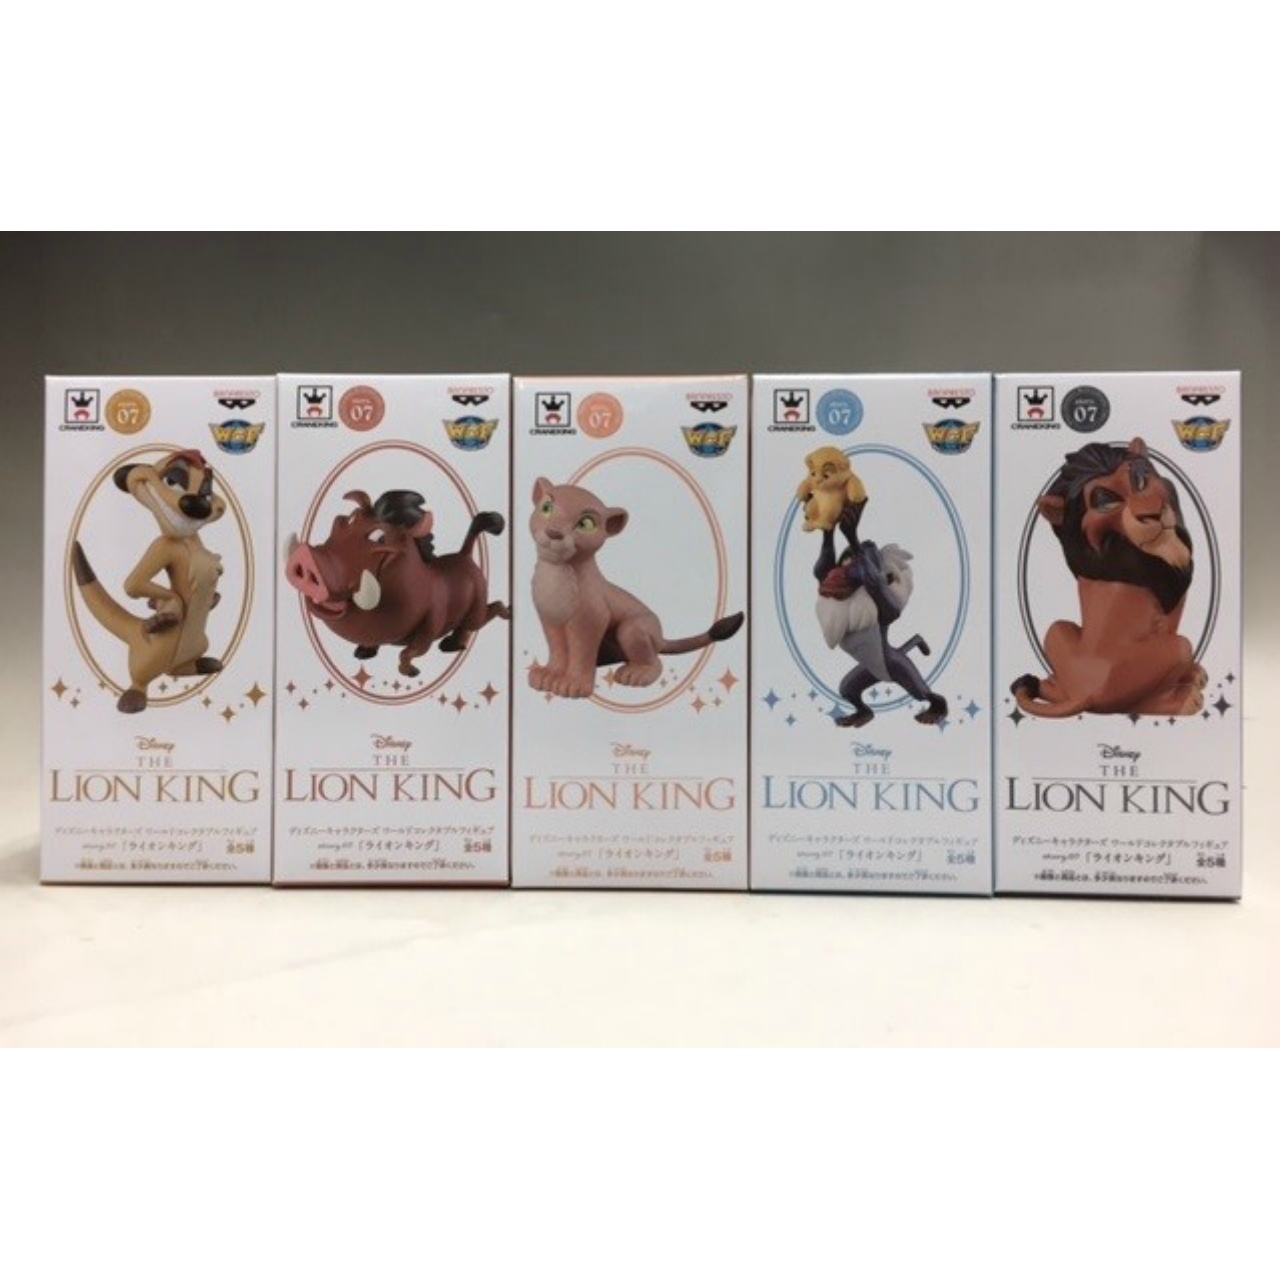 Disney Characters World Collectable Figure Story.07 Lion King set of 5